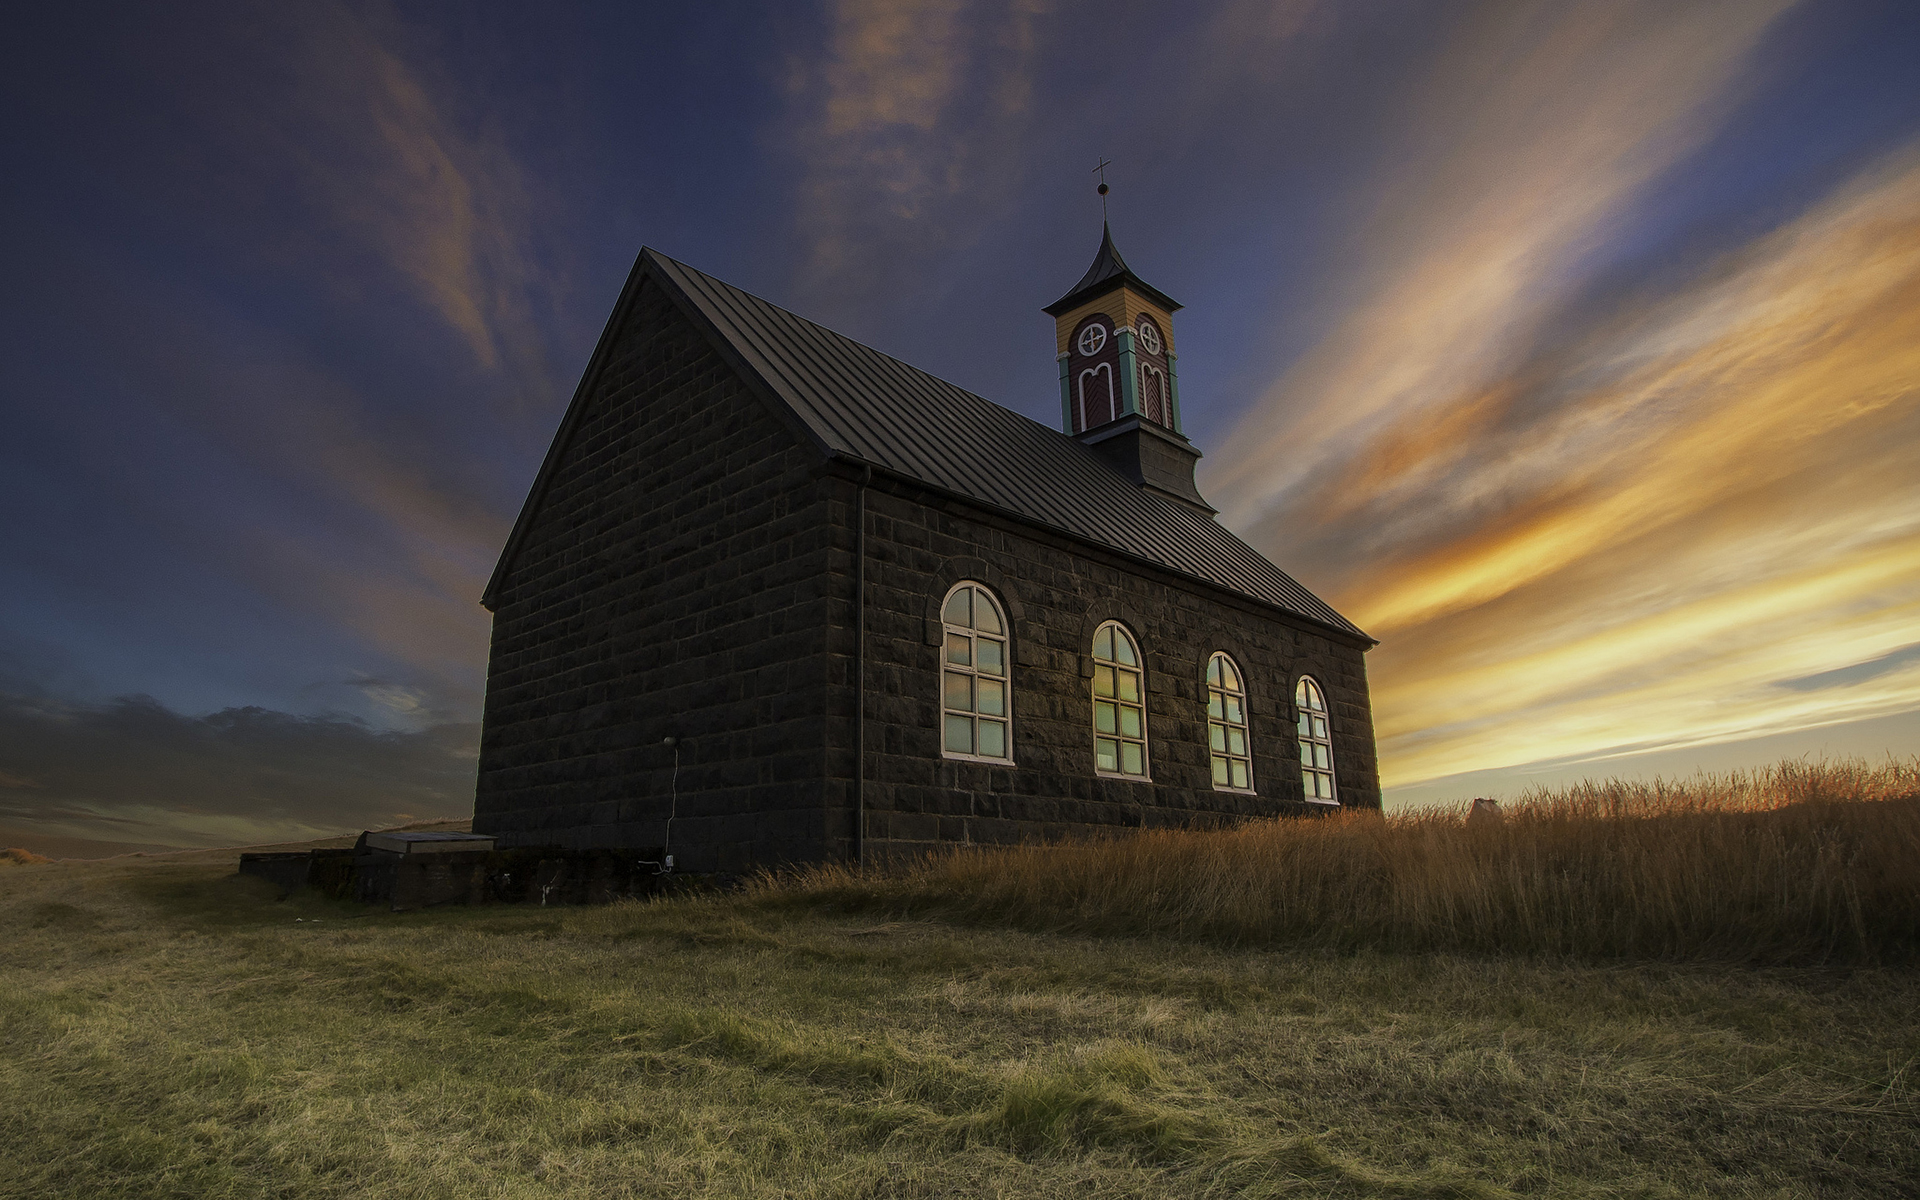 Chapel in a Field at Sunset by Ásmundur Þorkelsson